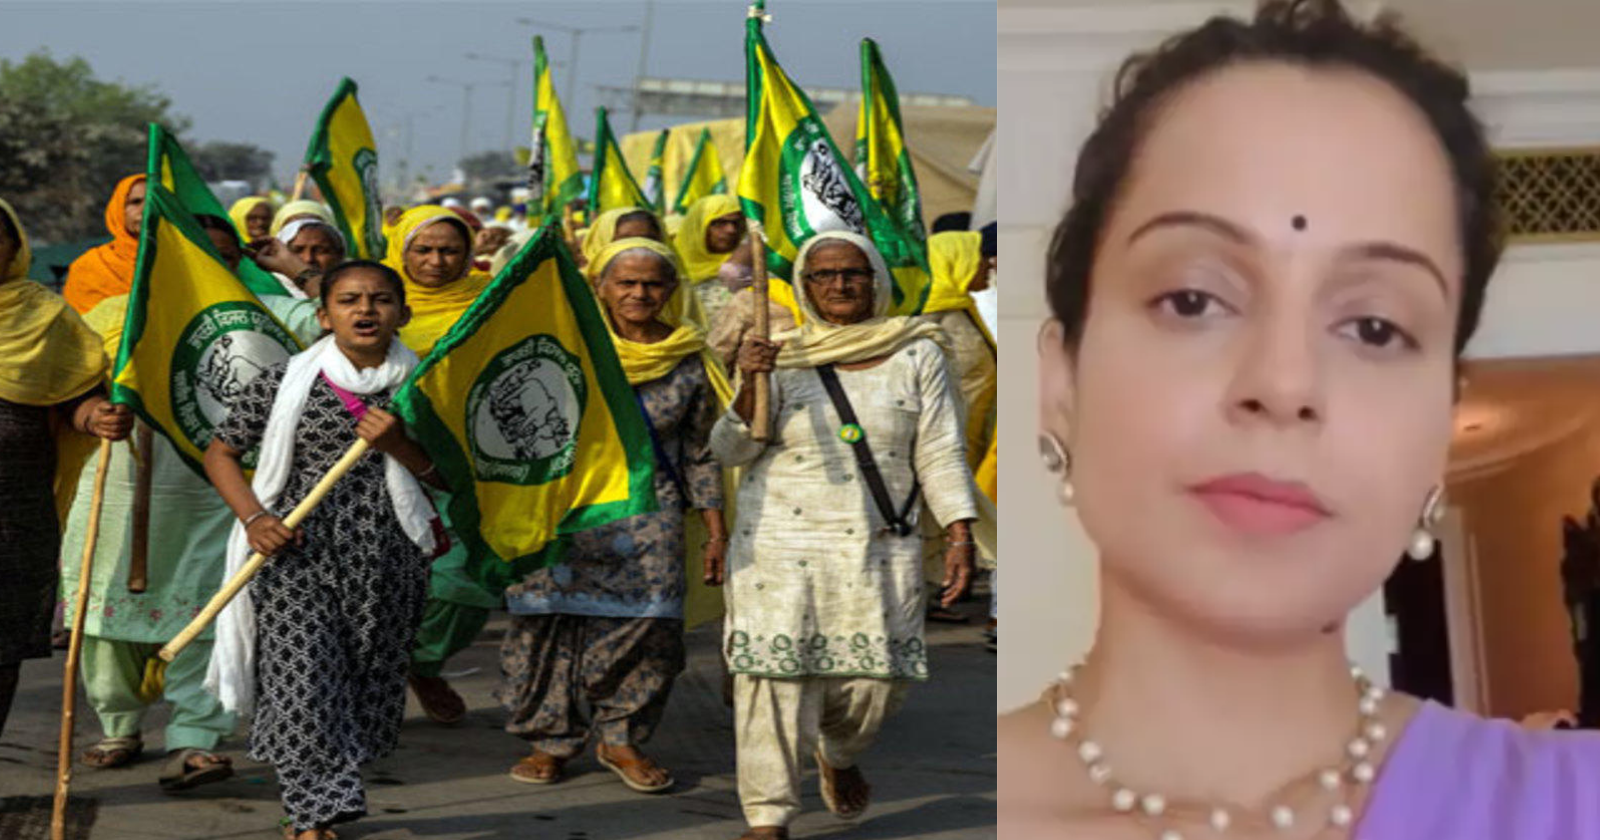 What Did Kangana Say About Farmers Protest That Provoked the